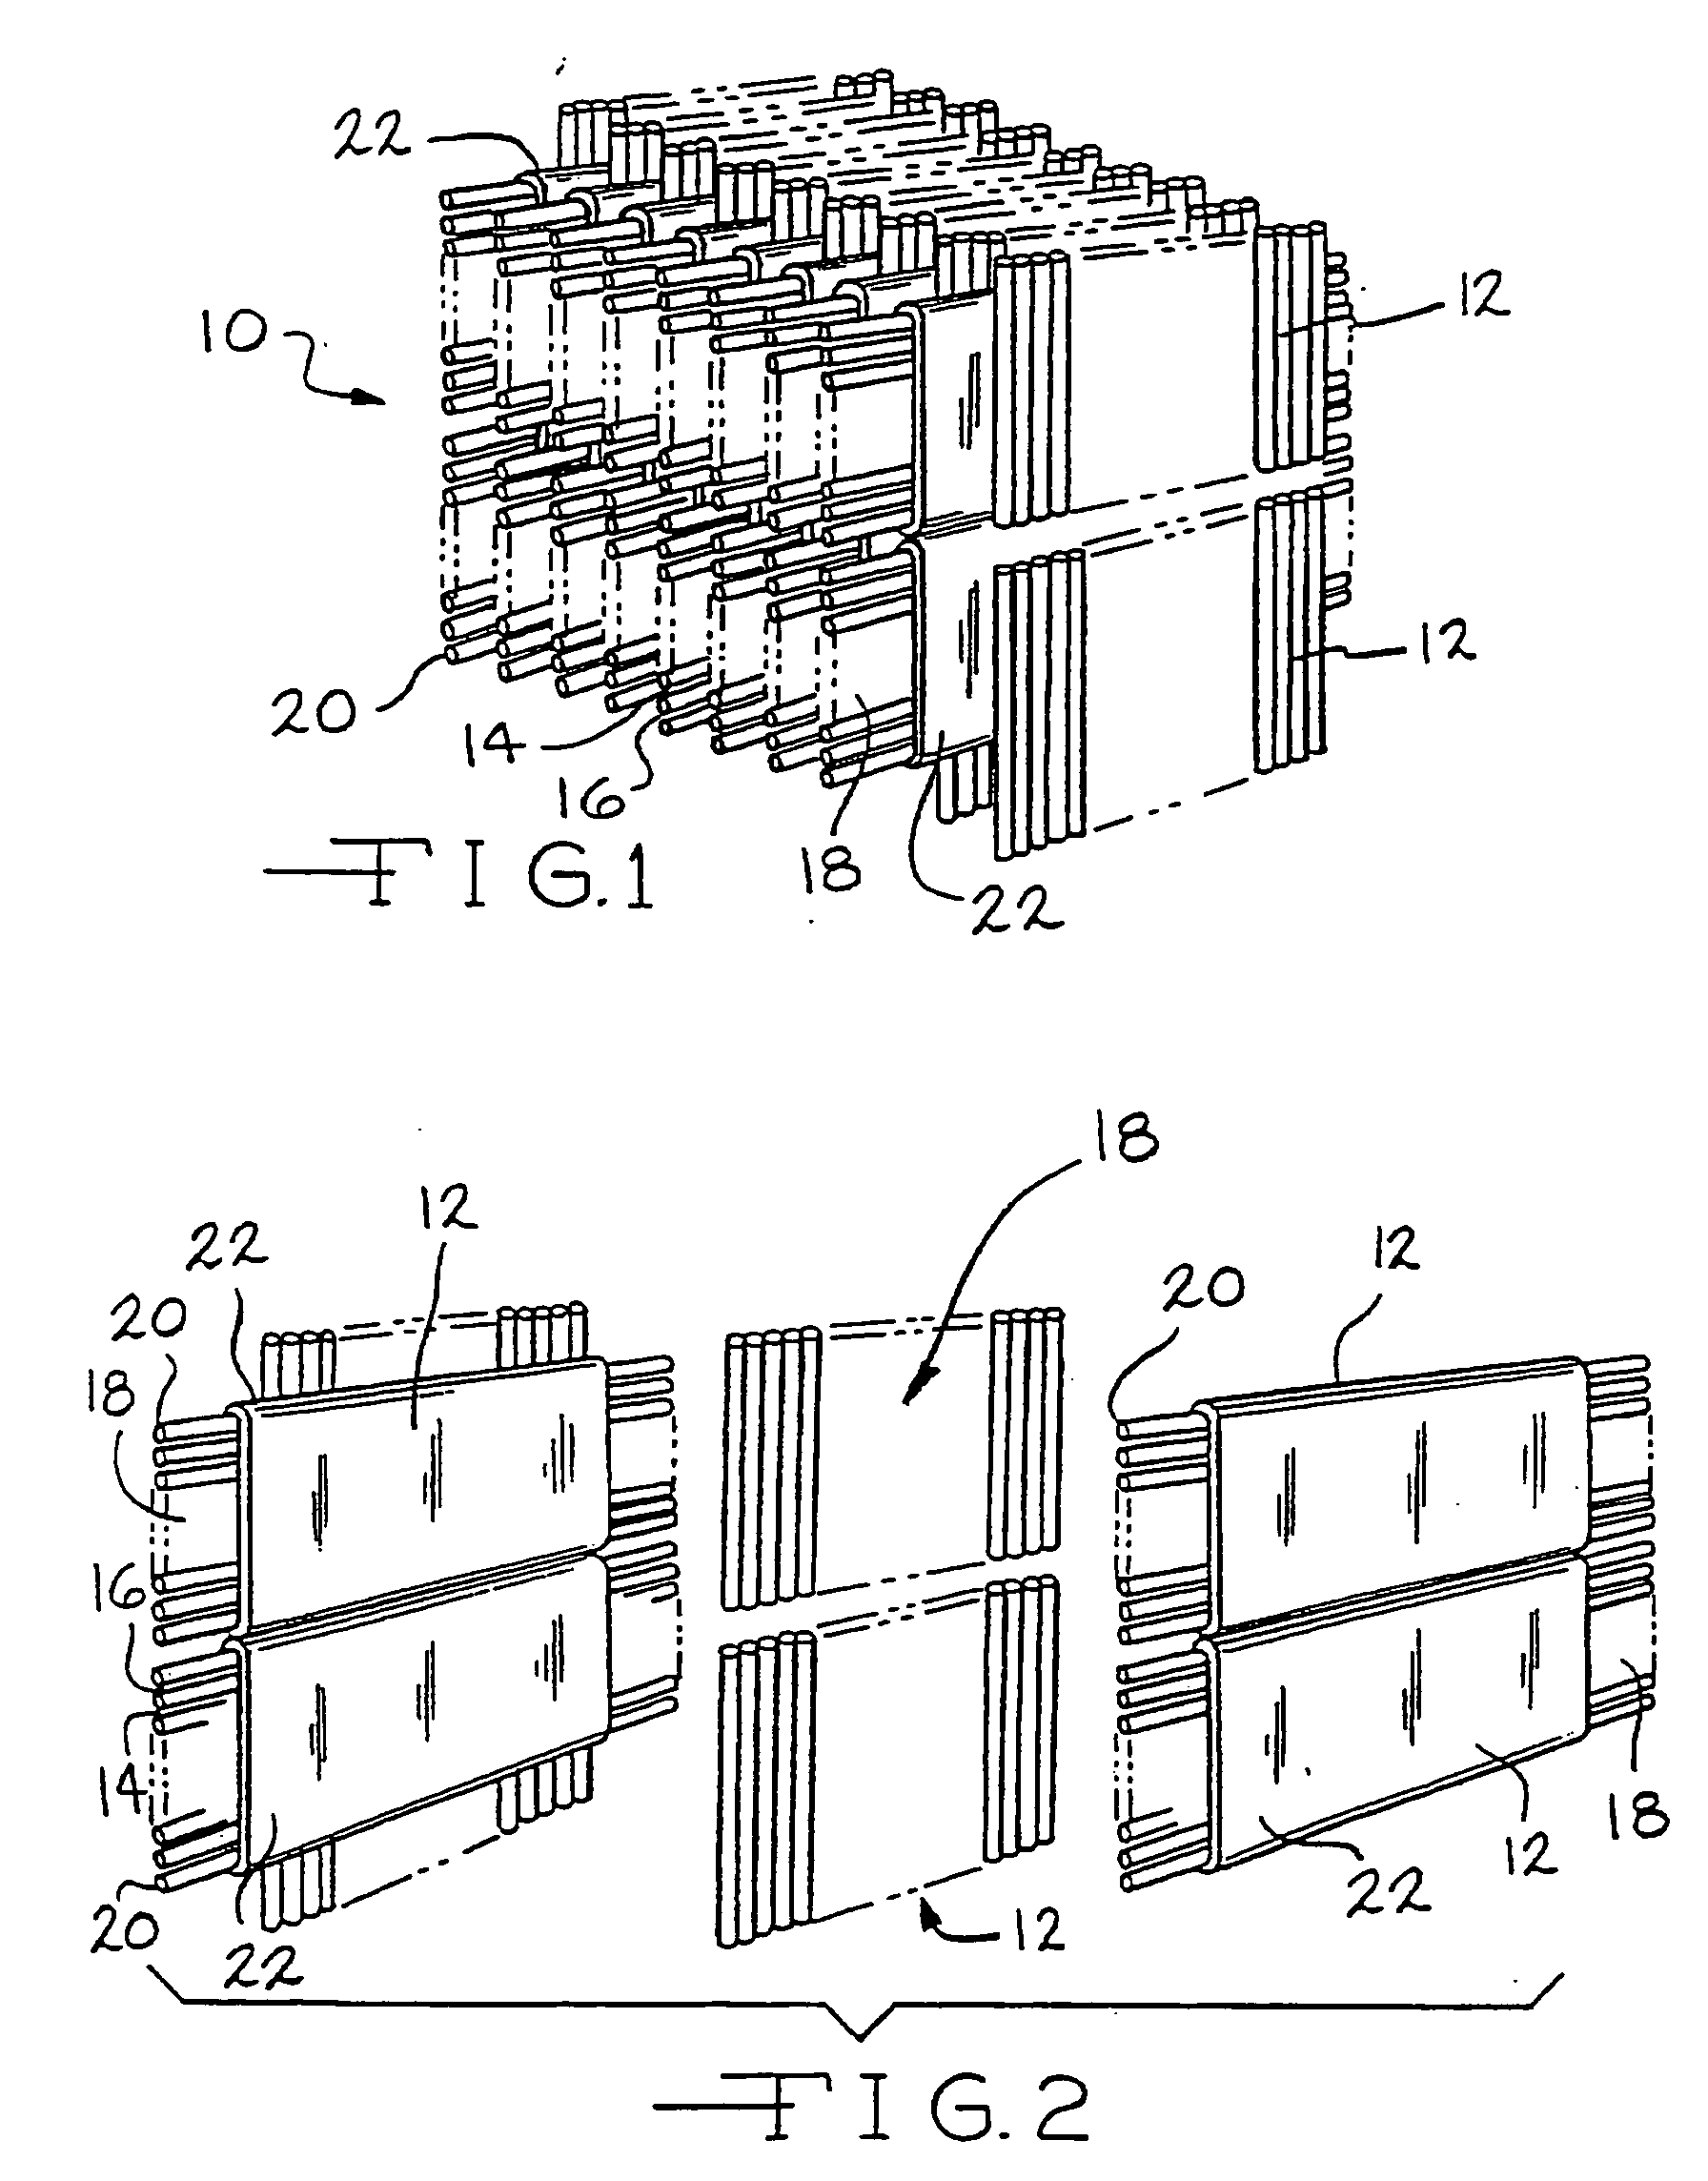 Low alkali sealing frits, and seals and devices utilizing such frits